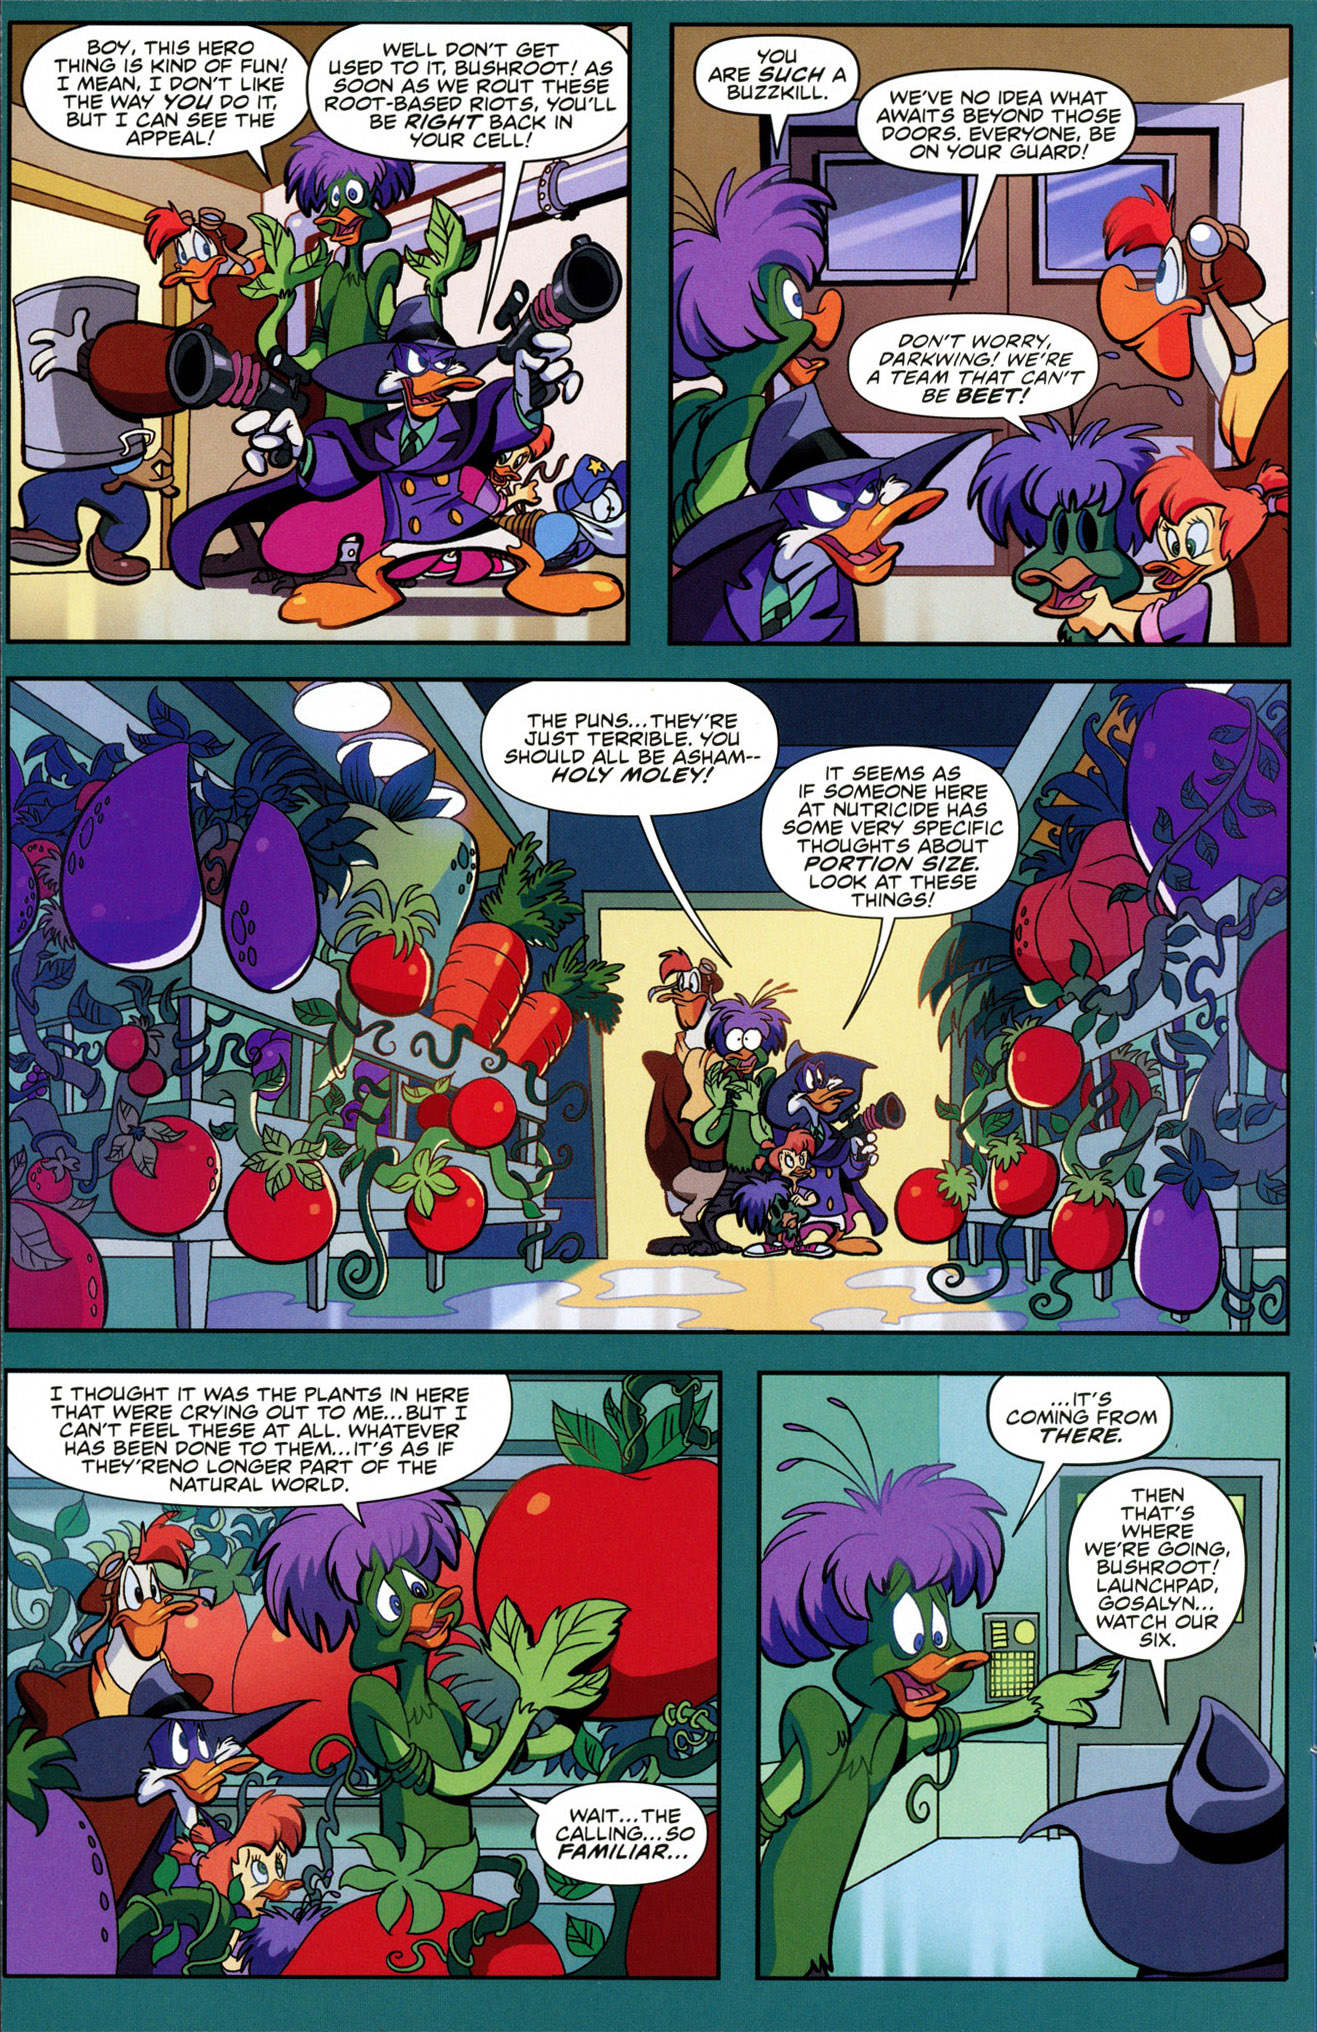 Disney Darkwing Duck 7 Read Disney Darkwing Duck Issue 7 Page